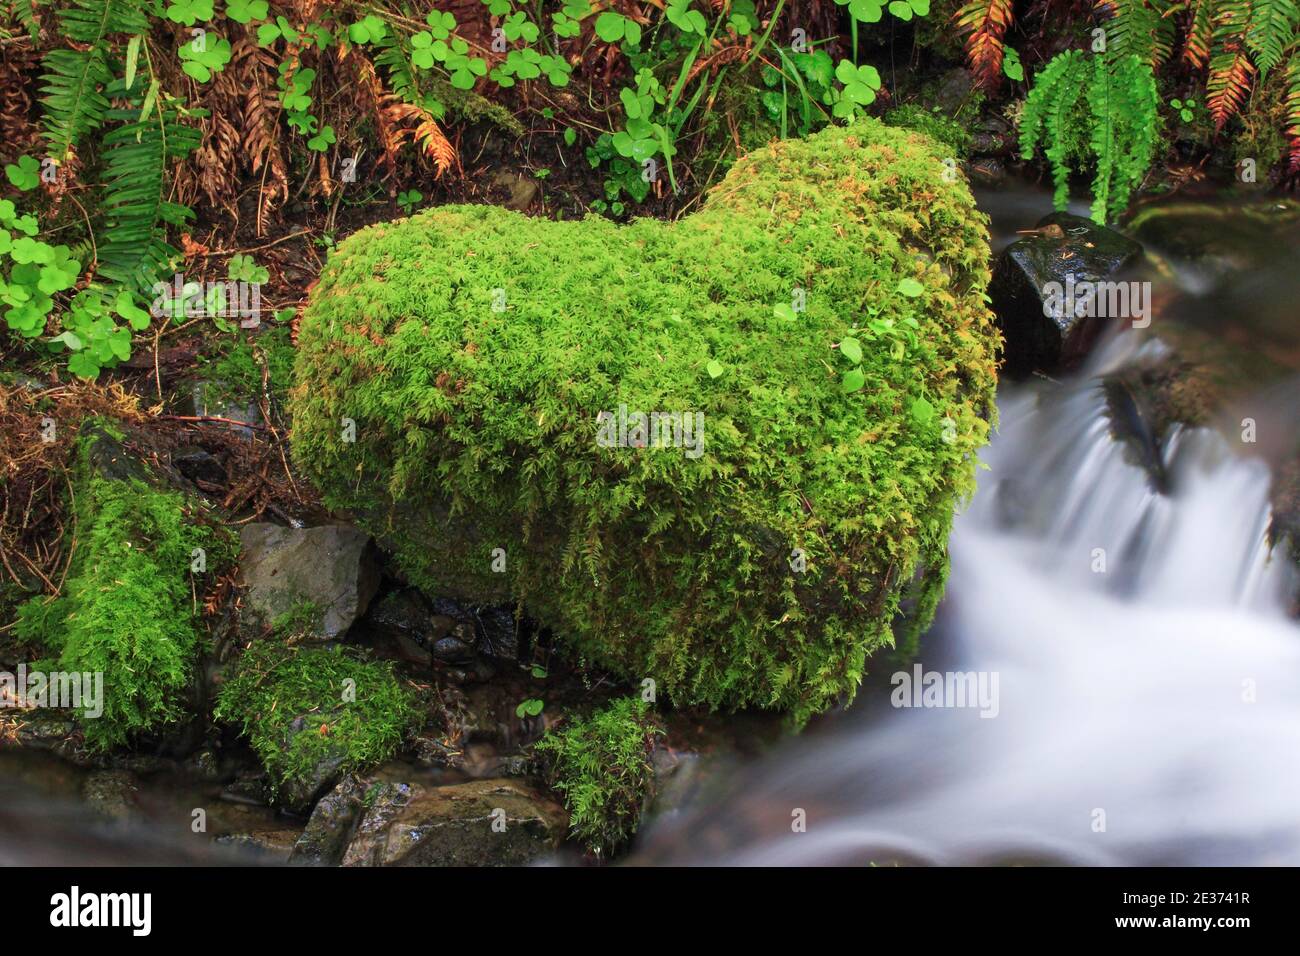 Moss covered stone Stock Photo